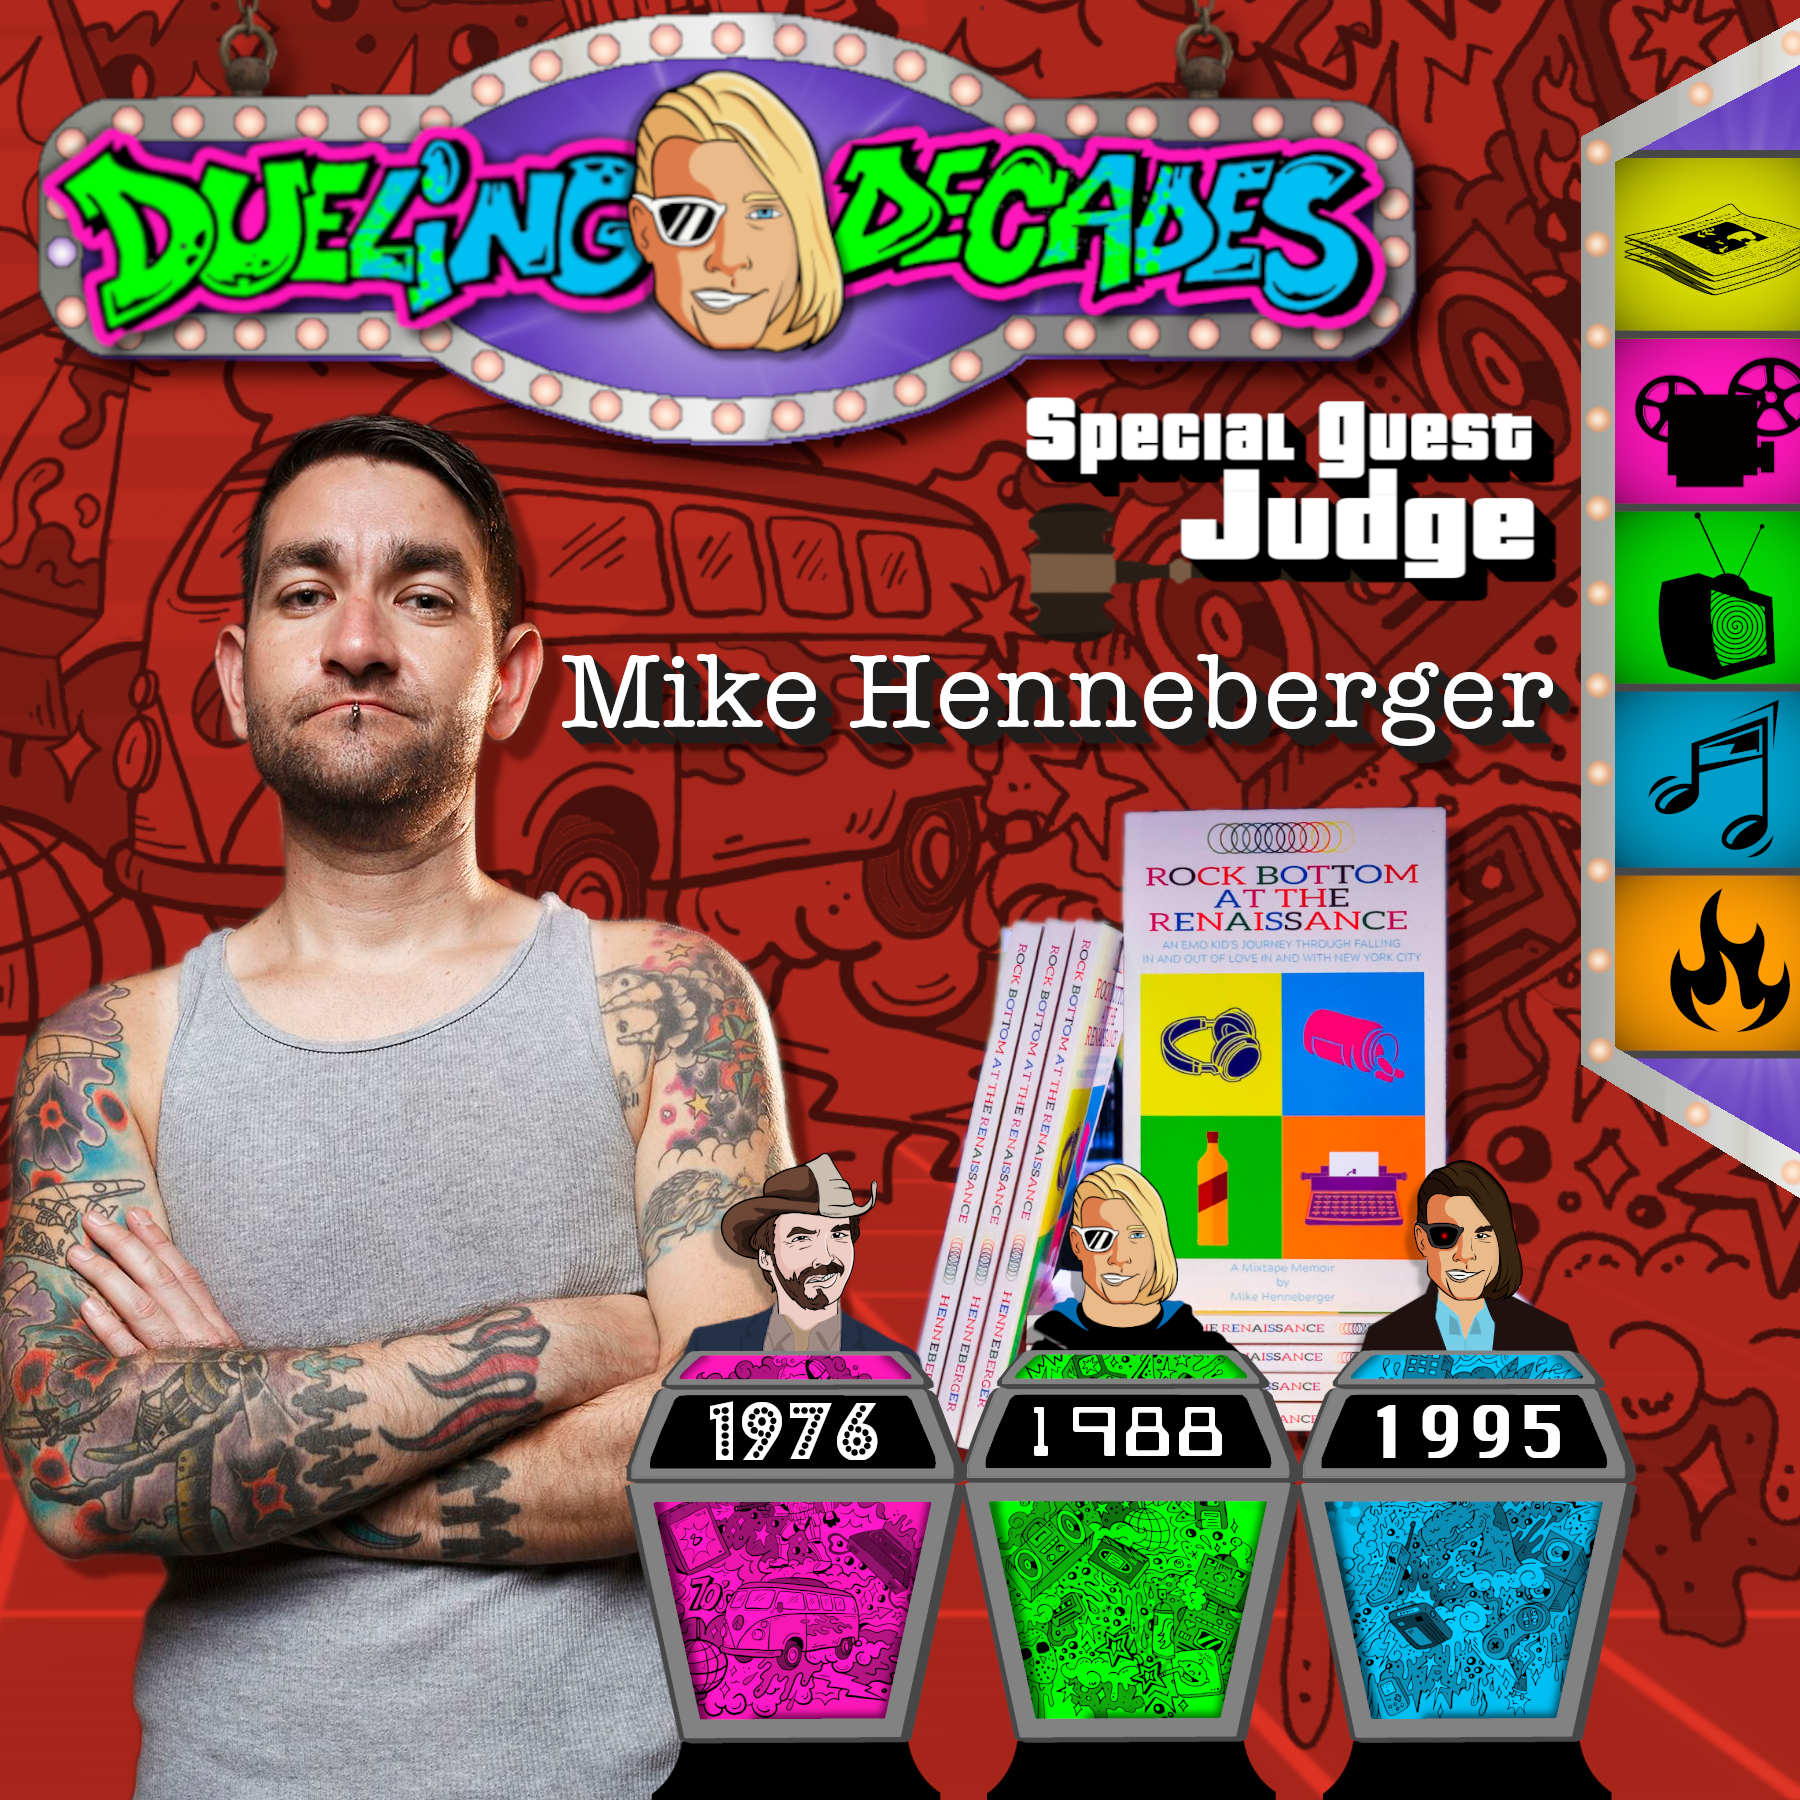 Emo kid Mike Henneberger hits Rock Bottom and tells us who had the best week 1976, 1988 or 1995!